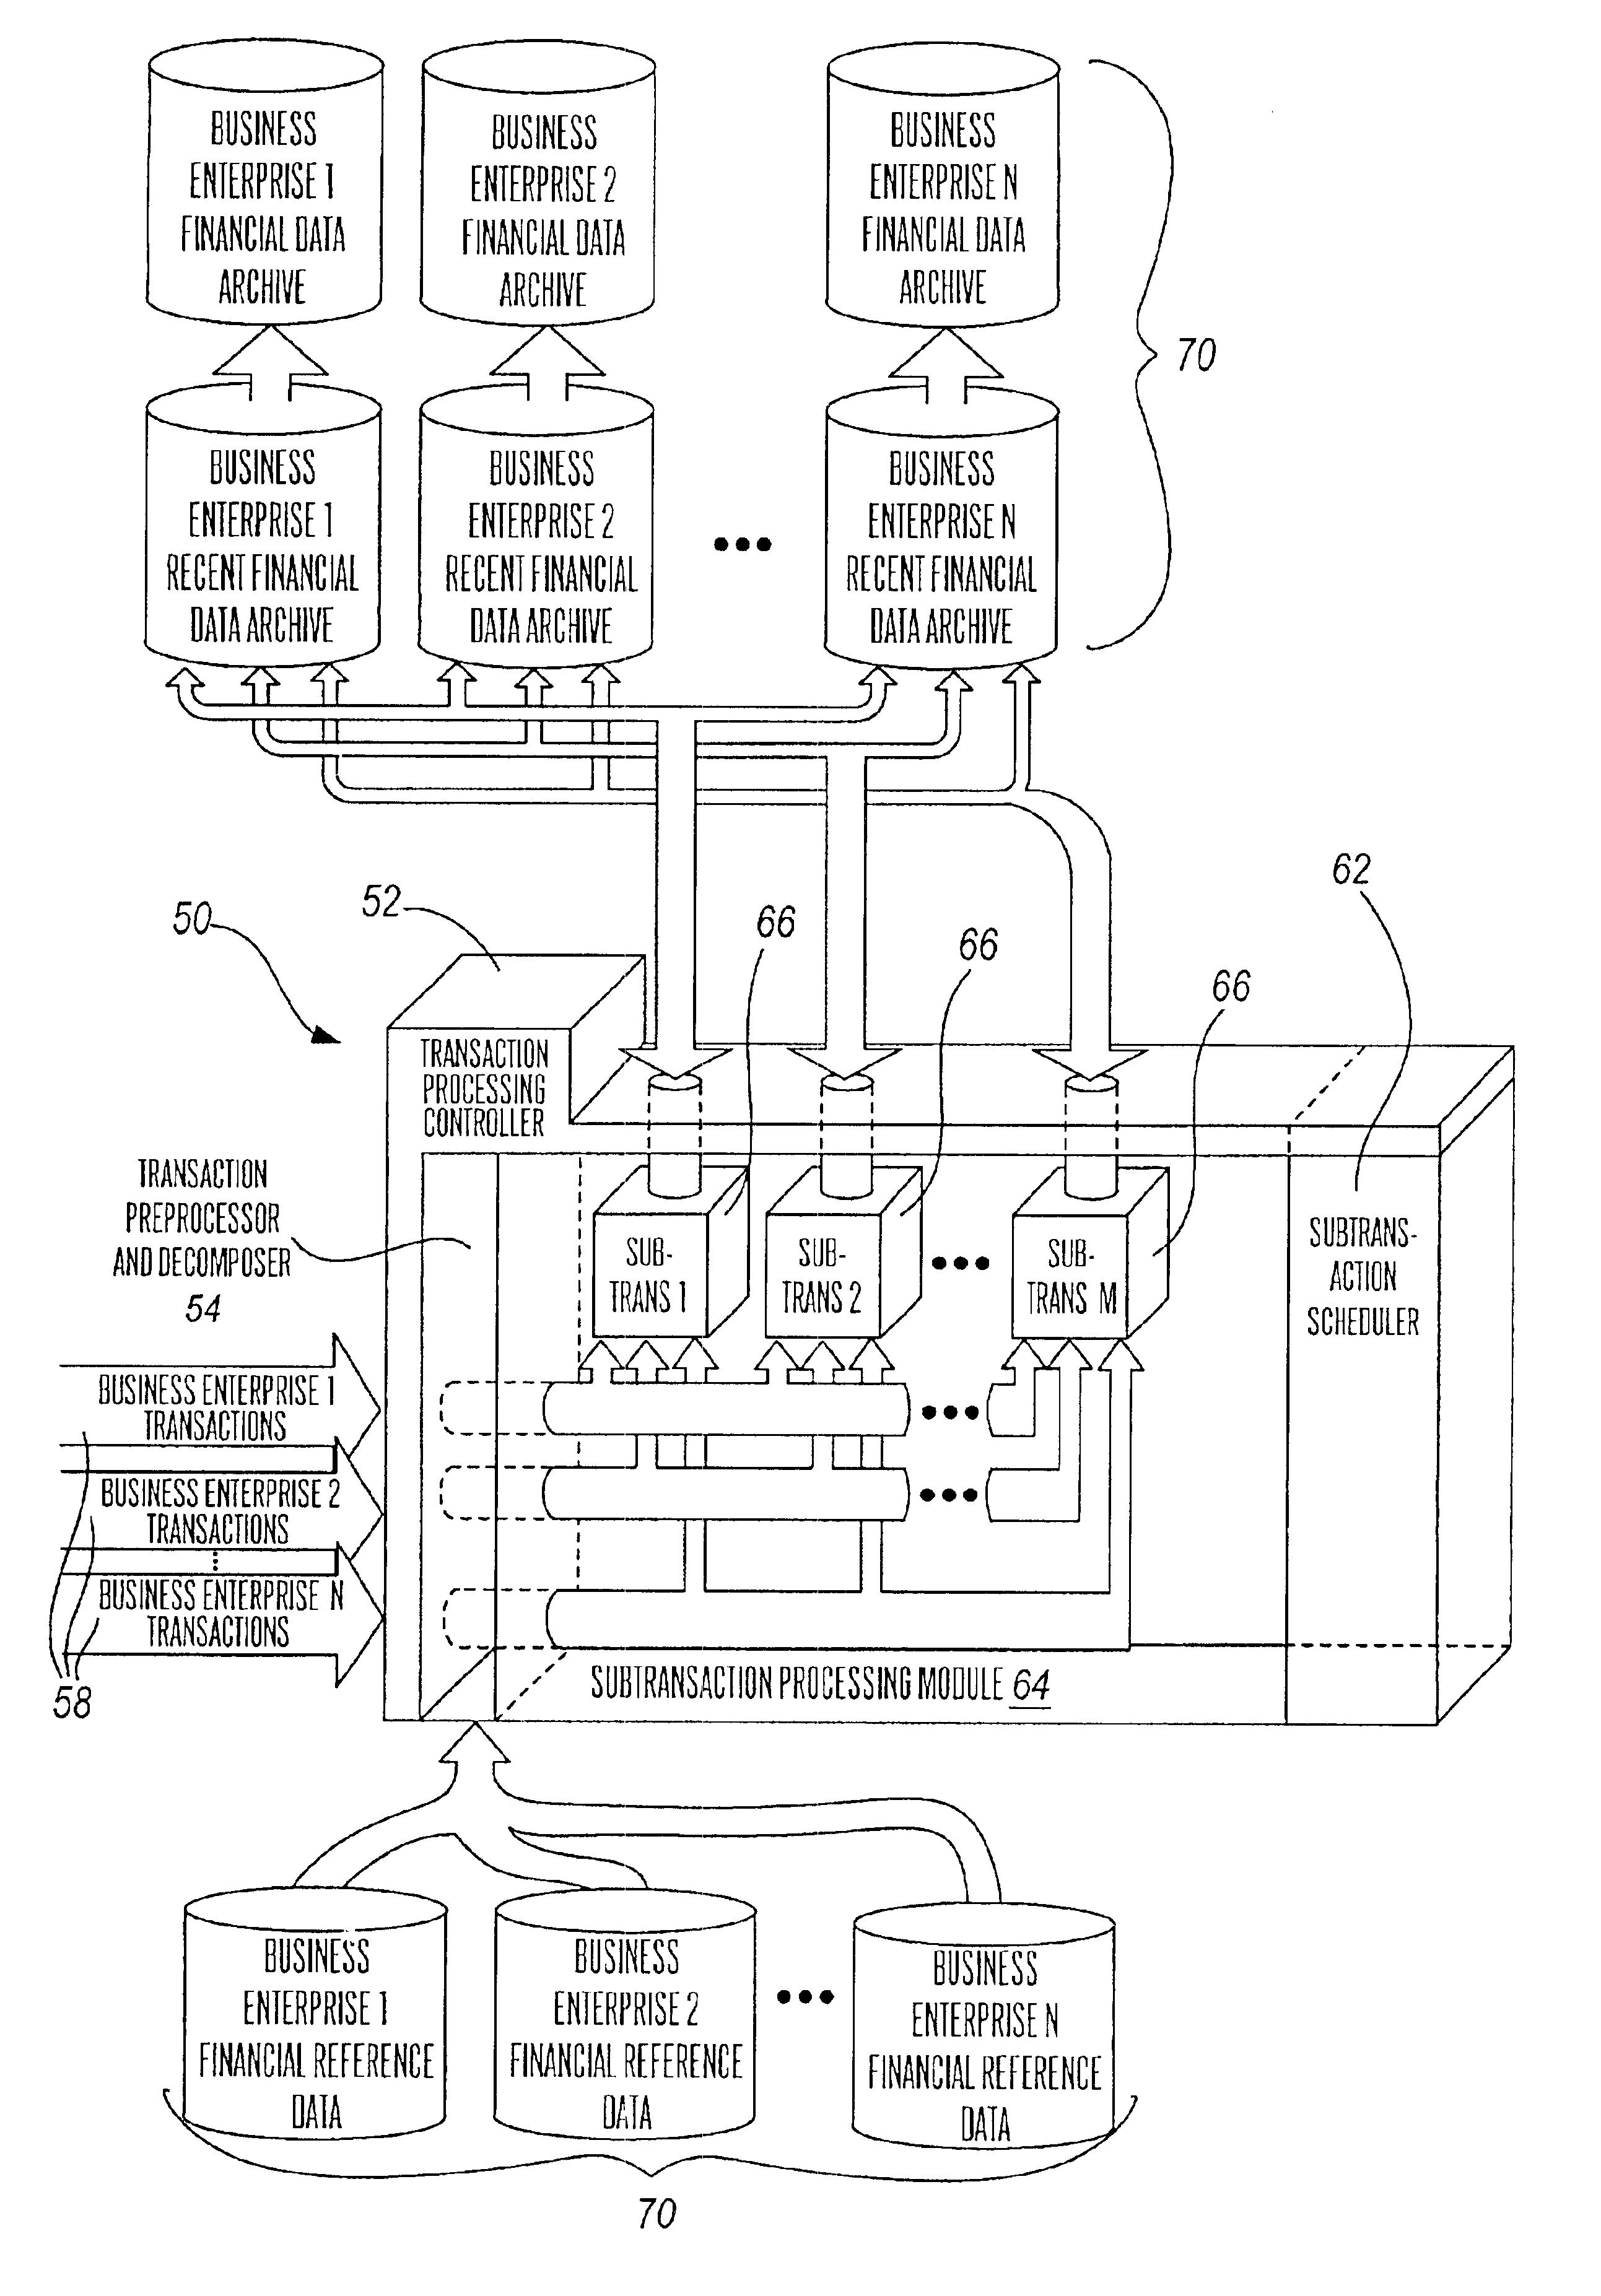 Multi-processing financial transaction processing system